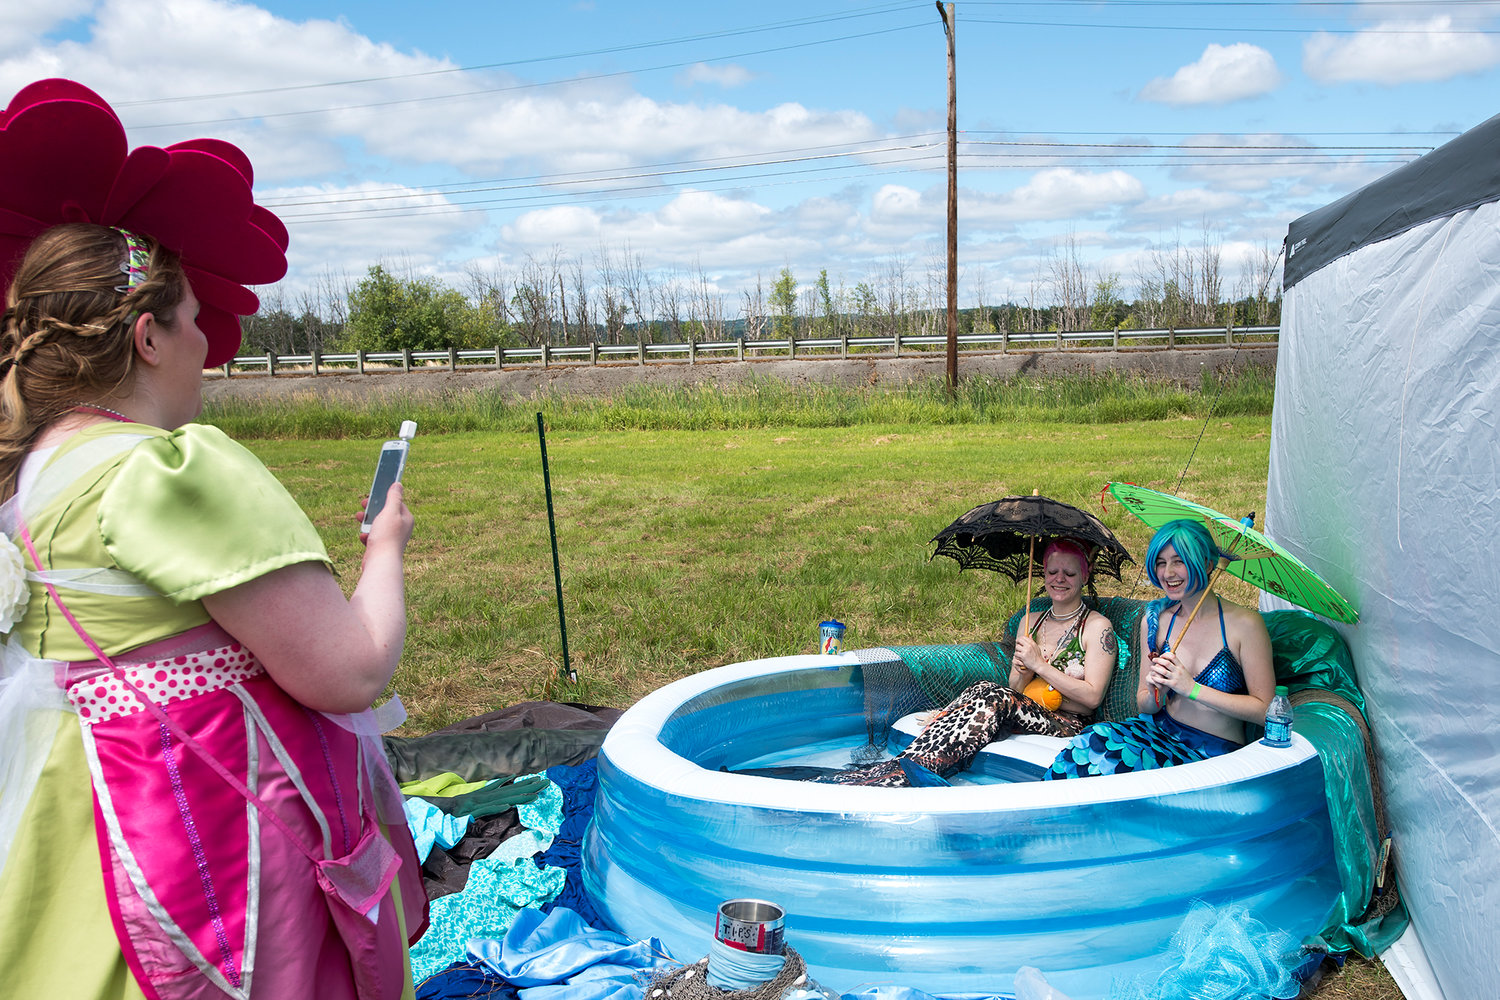 Tana Savage, playing the Sirena The Mermaid, right, and Mermaid Miyu, center, have their photo taken by Melanie Hall, of Milton, Wash., during the Fairy Blossom Festival on Saturday afternoon at Yard Birds in Chehalis.